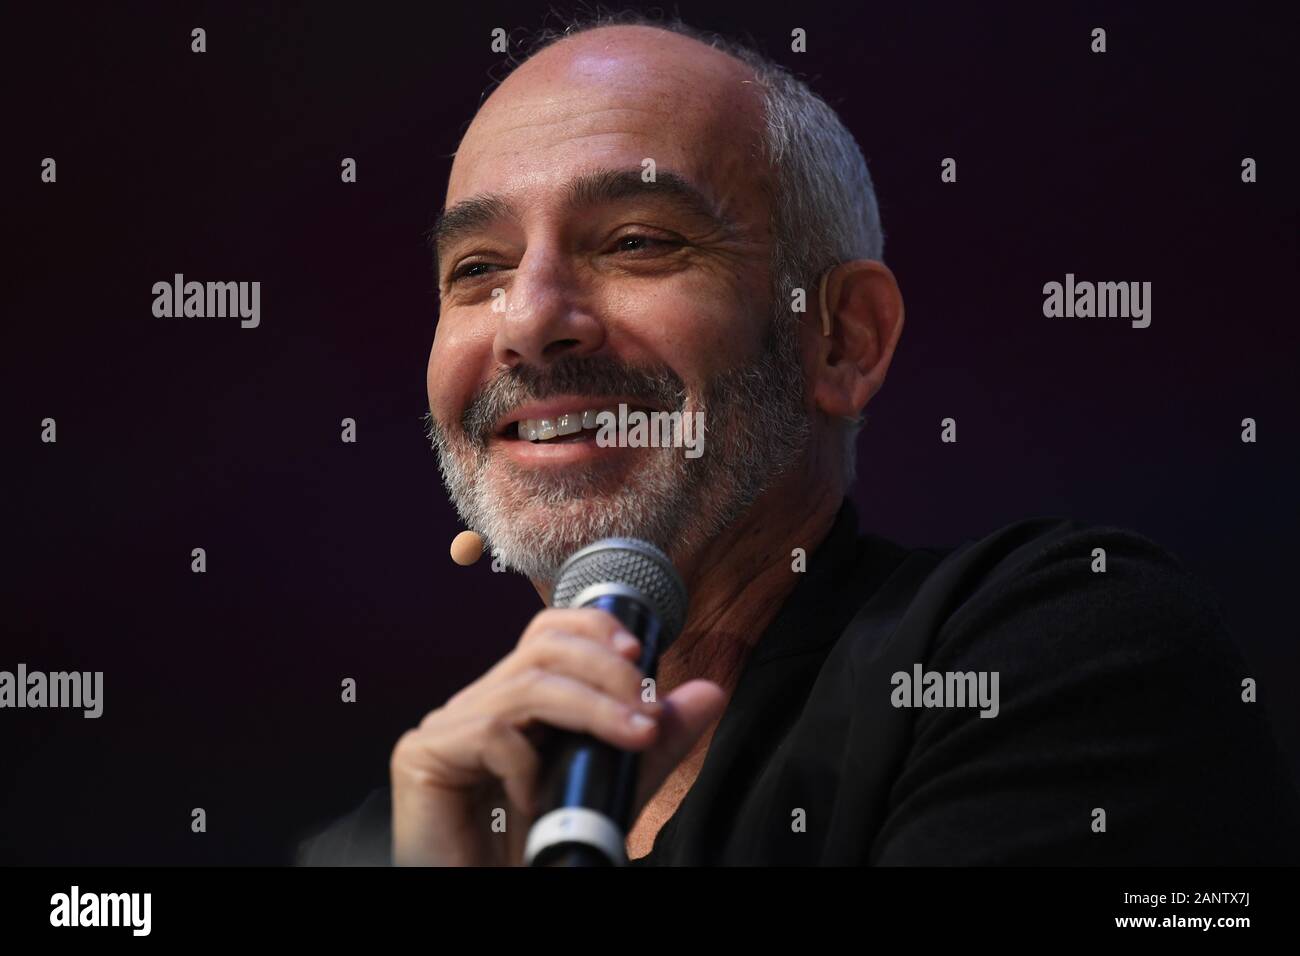 19 January 2020, Bavaria, Munich: Gadi Amit (President, Principal Designer & Owner of NewDealDesign LLC) during the panel discussion at DLD Munich Conference 2020, Europe’s big innovation conference, Alte Kongresshalle, Munich, January 18– 20, 2020 Picture Alliance for DLD / Hubert Burda Media | usage worldwide Stock Photo